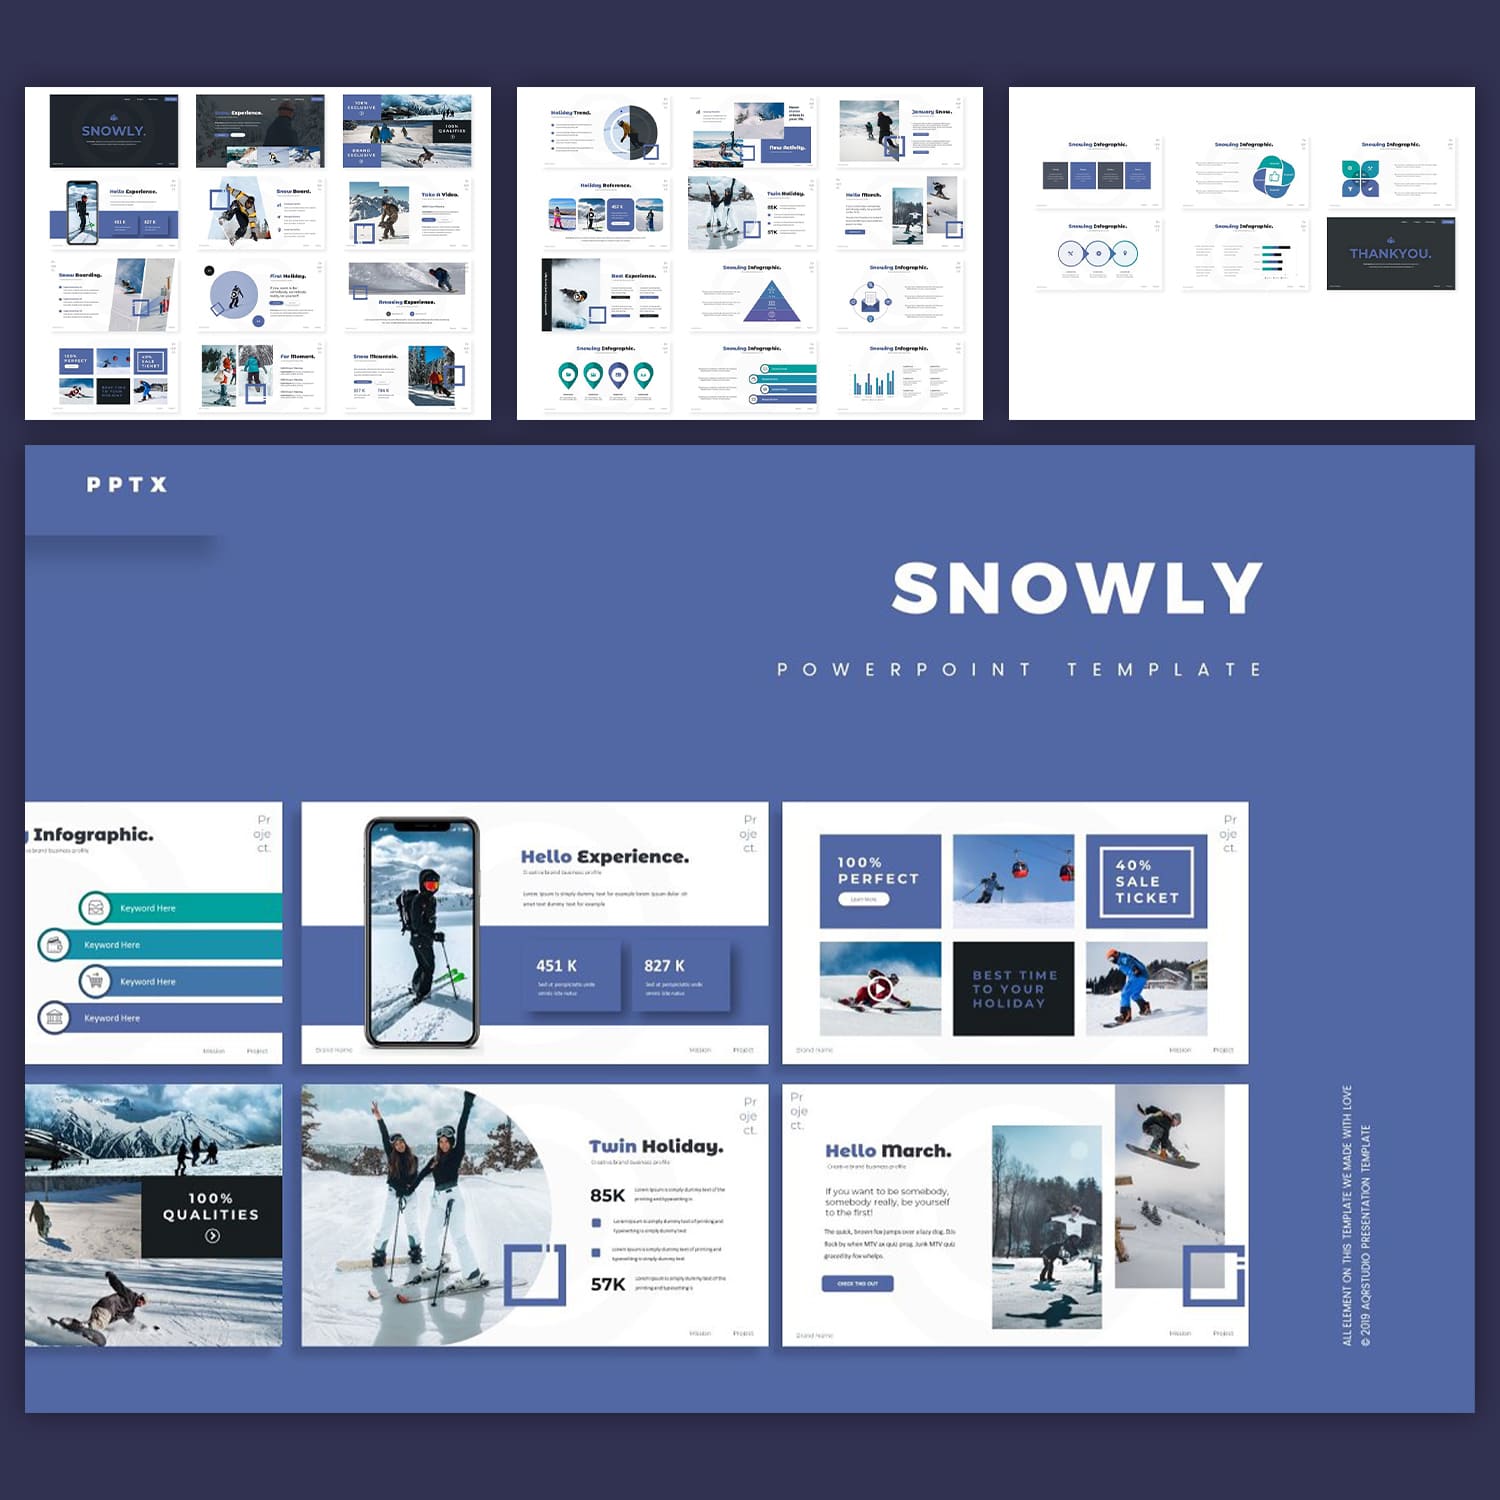 Snowly - Powerpoint Template Example.